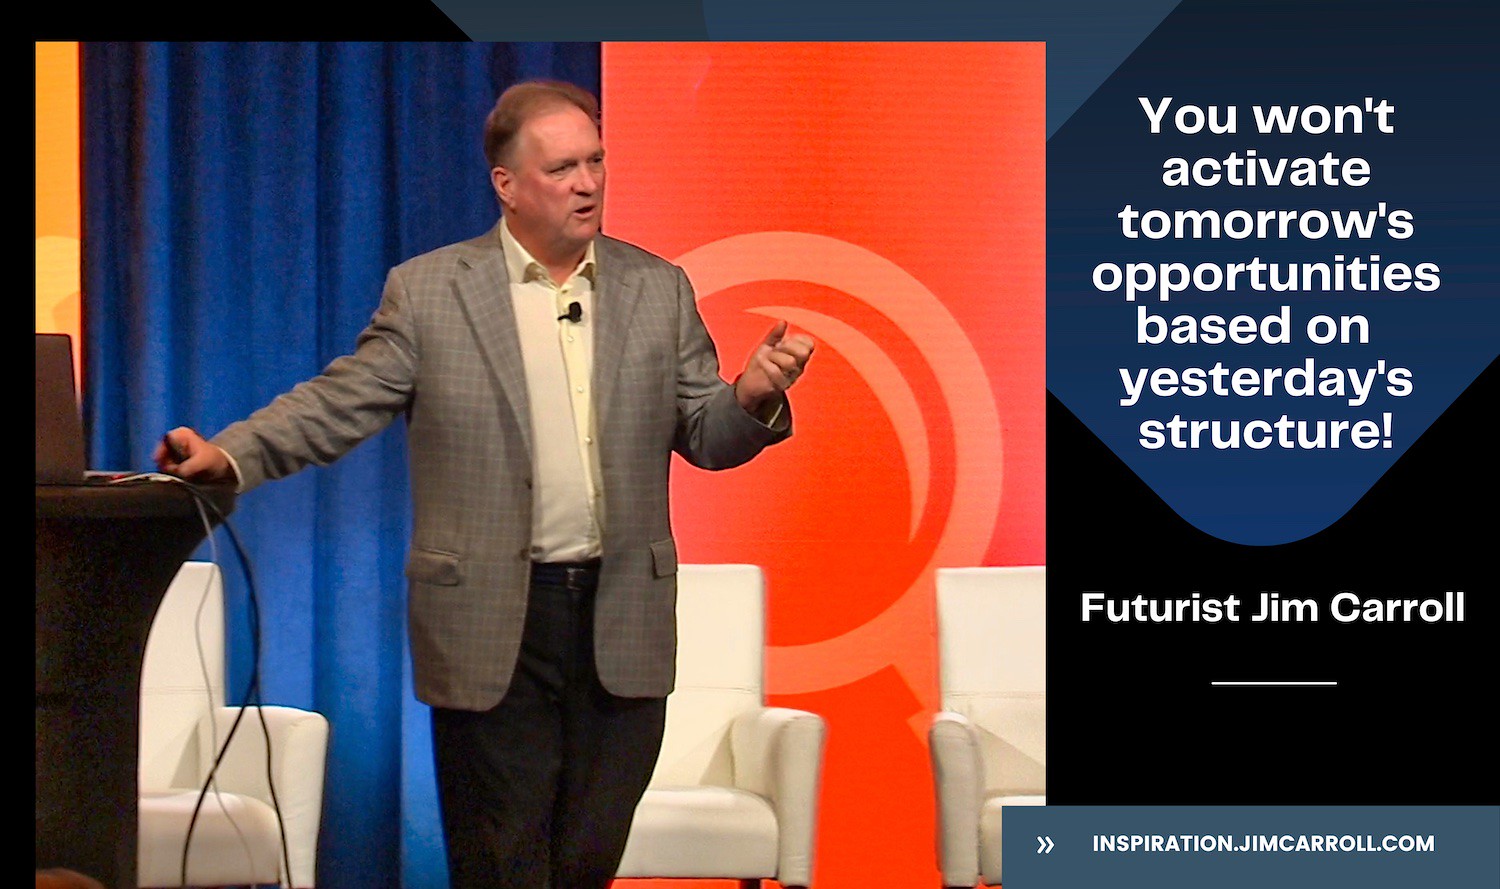 "You won't activate tomorrow's opportunities based on yesterday's structure" - Futurist Jim Carroll